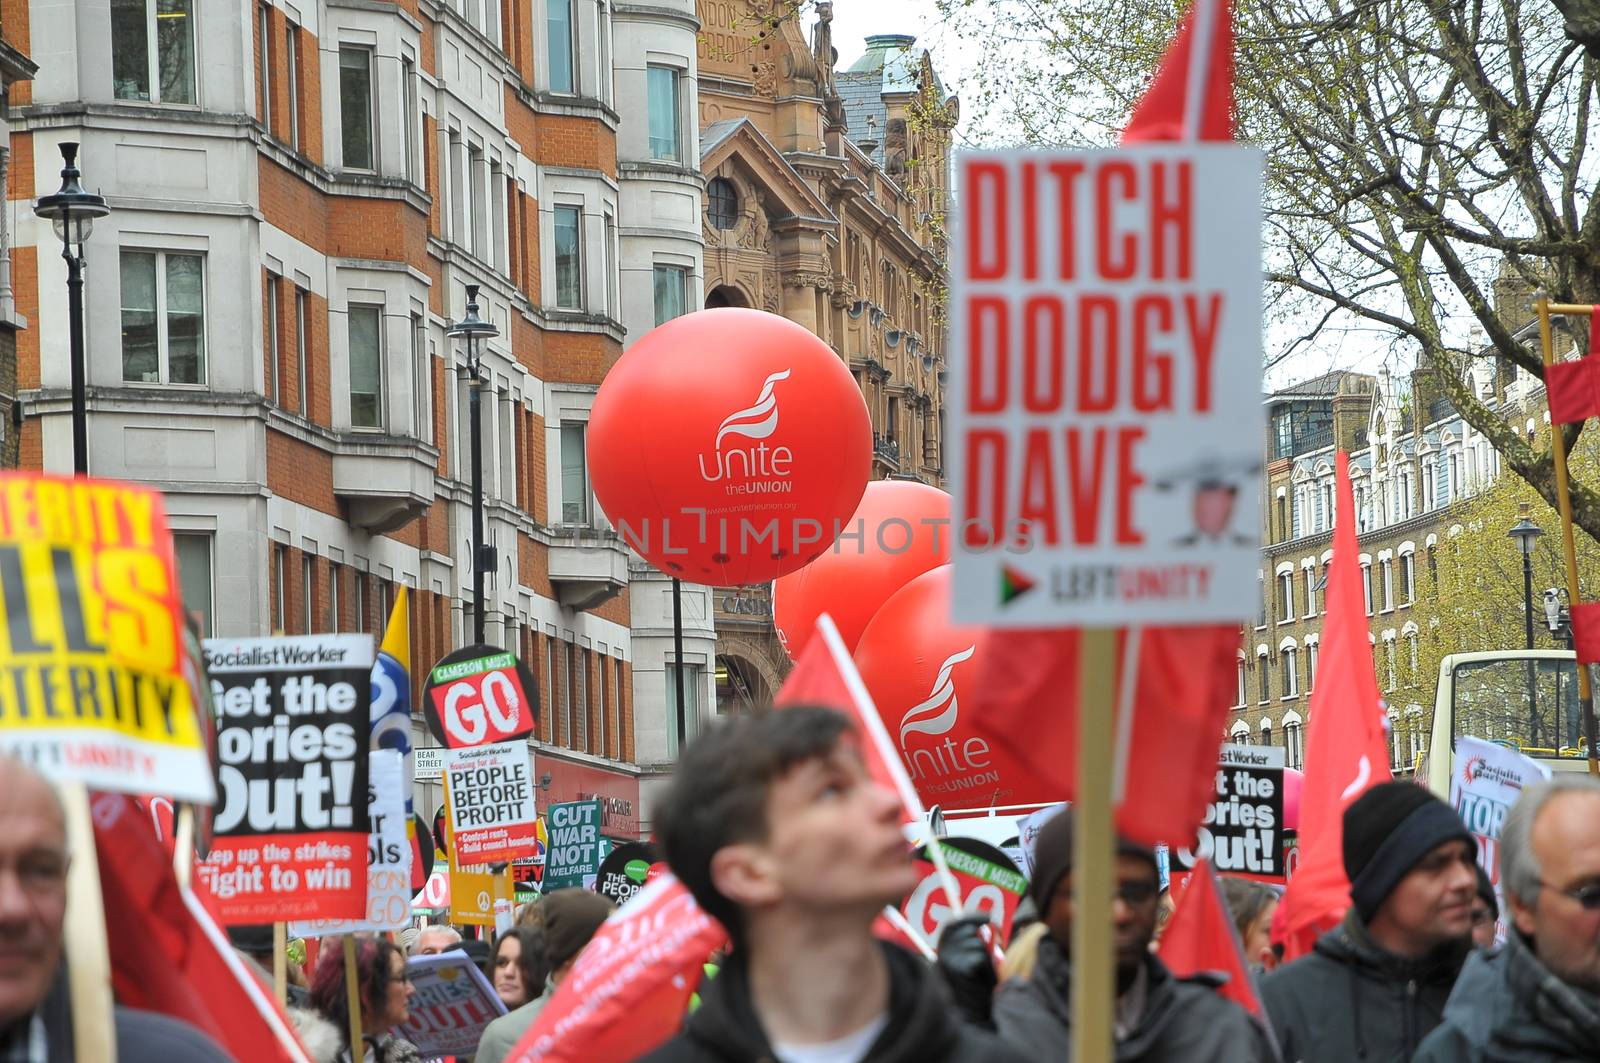 UNITED KINGDOM, London: A protester holds a sign reading 'Ditch Dodgy Dave' as ten of thousands march and protest against the Tories government and demanded David Cameron's resignation in Trafalgar square in London on April 16, 2016. Protesters descended to London in hundreds of coaches from all over the UK to take part in this anti-austerity protest.